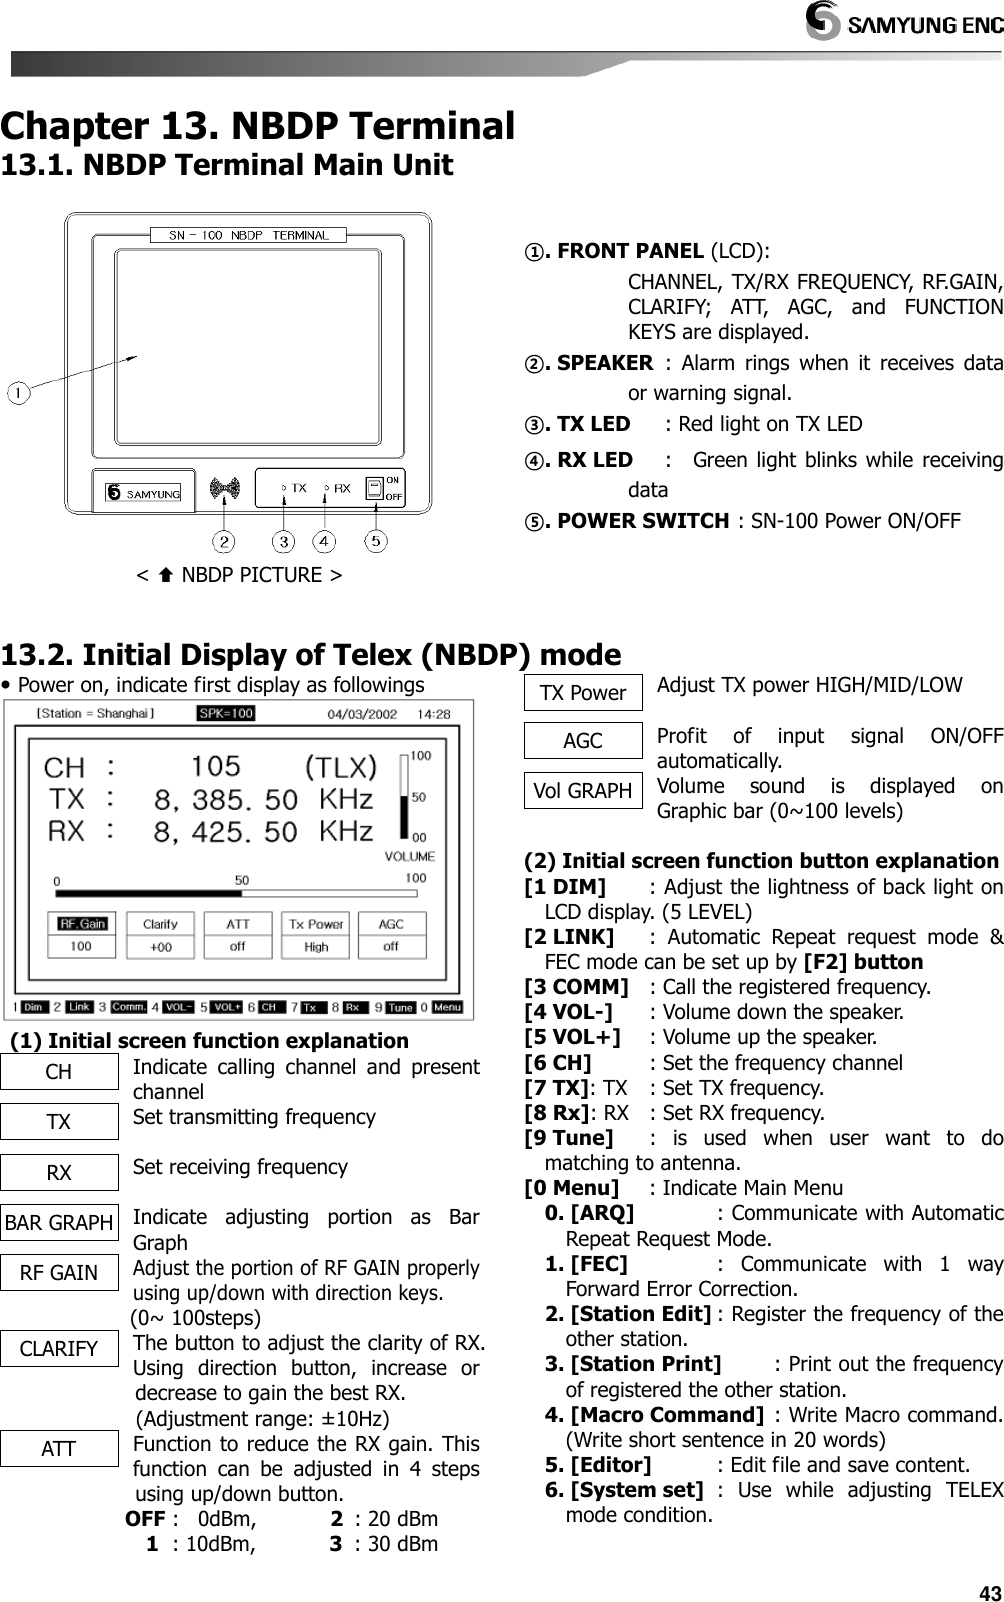   43 Chapter 13. NBDP Terminal 13.1. NBDP Terminal Main Unit   &lt;  NBDP PICTURE &gt;     ①. FRONT PANEL (LCD): CHANNEL, TX/RX FREQUENCY, RF.GAIN, CLARIFY;  ATT,  AGC,  and  FUNCTION KEYS are displayed. ②. SPEAKER   :  Alarm  rings  when  it  receives  data or warning signal. ③. TX LED       : Red light on TX LED ④. RX LED      :    Green light blinks while  receiving data   ⑤. POWER SWITCH  : SN-100 Power ON/OFF  13.2. Initial Display of Telex (NBDP) mode  Power on, indicate first display as followings    (1) Initial screen function explanation Indicate  calling  channel  and  present channel Set transmitting frequency  Set receiving frequency  Indicate  adjusting  portion  as  Bar Graph Adjust the portion of RF GAIN properly using up/down with direction keys. (0~ 100steps) The button to adjust the clarity of RX. Using  direction  button,  increase  or decrease to gain the best RX.                           (Adjustment range: ±10Hz) Function to reduce the RX gain. This function  can  be  adjusted  in  4  steps         using up/down button.             OFF  :    0dBm,              2   : 20 dBm               1   : 10dBm,              3   : 30 dBm Adjust TX power HIGH/MID/LOW              Profit  of  input  signal  ON/OFF automatically. Volume  sound  is  displayed  on Graphic bar (0~100 levels)  (2) Initial screen function button explanation [1 DIM]         : Adjust the lightness of back light on LCD display. (5 LEVEL) [2 LINK]       :  Automatic  Repeat  request  mode  &amp; FEC mode can be set up by [F2] button [3 COMM]    : Call the registered frequency. [4 VOL-]       : Volume down the speaker. [5 VOL+]      : Volume up the speaker. [6 CH]           : Set the frequency channel [7 TX]: TX     : Set TX frequency. [8 Rx]: RX    : Set RX frequency. [9 Tune]       :  is  used  when  user  want  to  do matching to antenna. [0 Menu]      : Indicate Main Menu 0. [ARQ]                : Communicate with Automatic Repeat Request Mode. 1. [FEC]                 :  Communicate  with  1  way Forward Error Correction. 2. [Station Edit] : Register the frequency of the other station. 3. [Station Print]          : Print out the frequency of registered the other station. 4. [Macro Command]  : Write Macro command. (Write short sentence in 20 words) 5. [Editor]             : Edit file and save content. 6. [System set]   :  Use  while  adjusting  TELEX mode condition. CH TX RX BAR GRAPH RF GAIN CLARIFY ATT TX Power AGC Vol GRAPH 